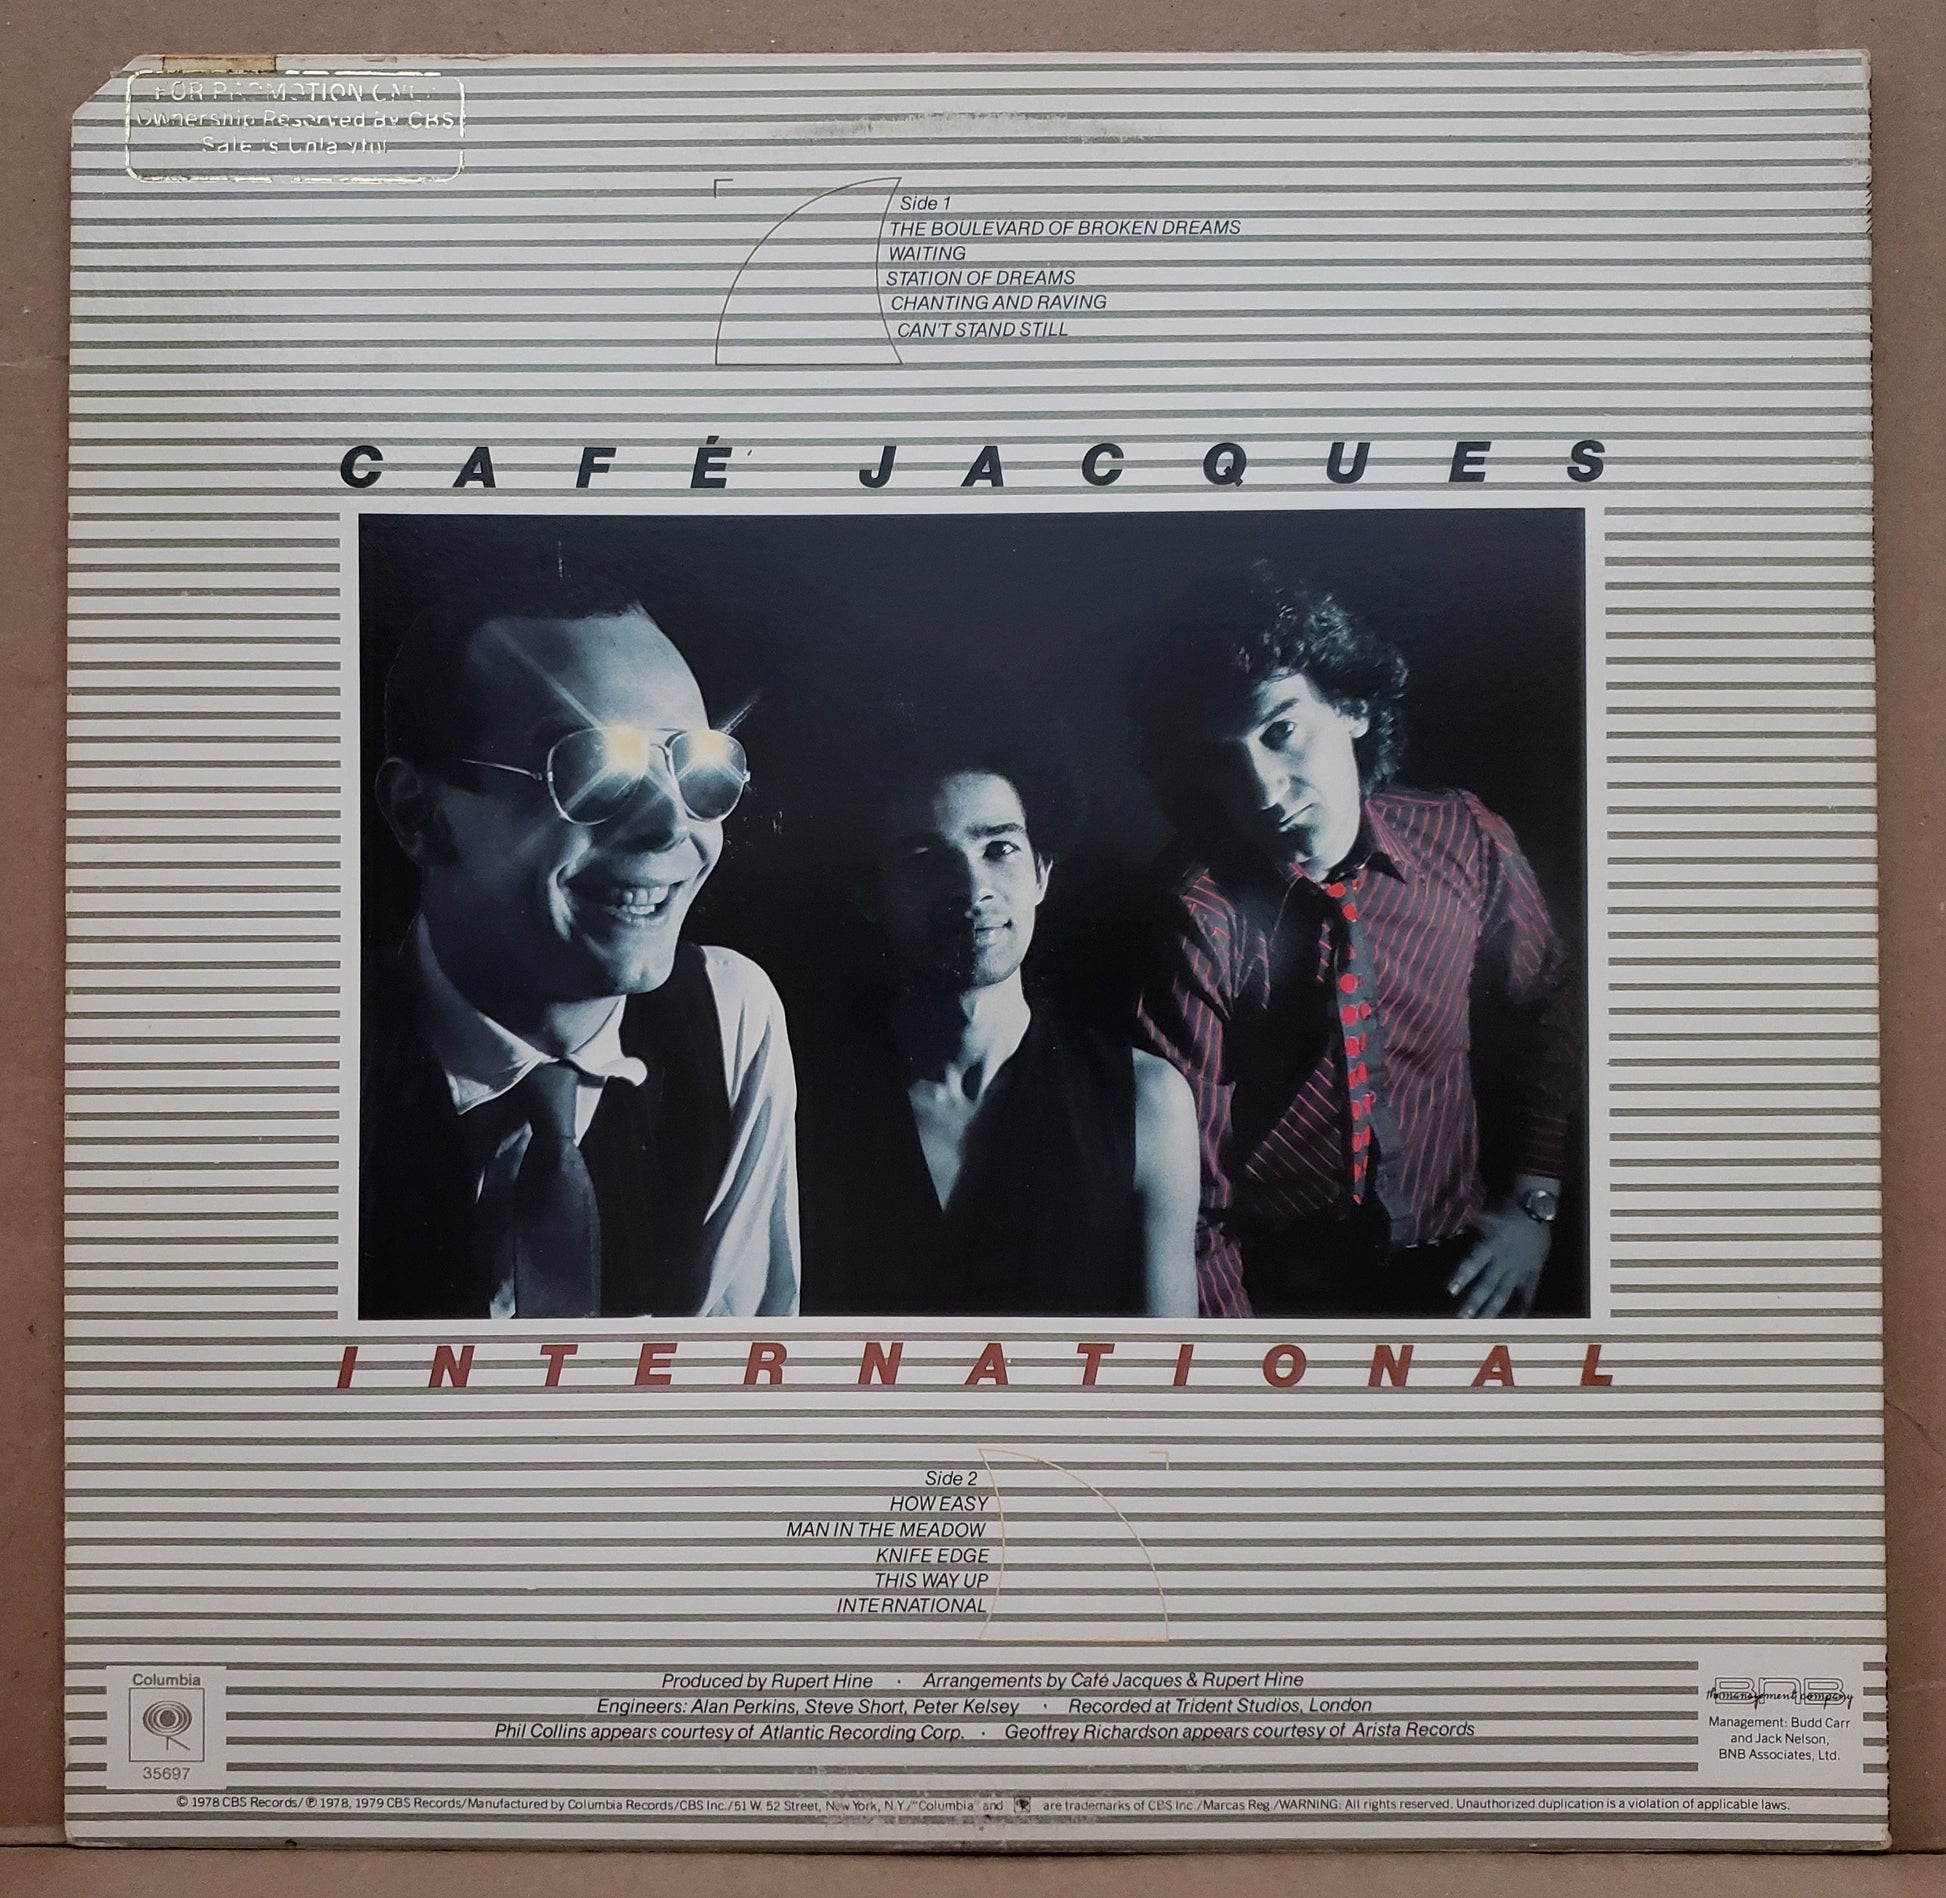 Cafe Jacques - International [1979 Promo] [Used Vinyl Record LP]